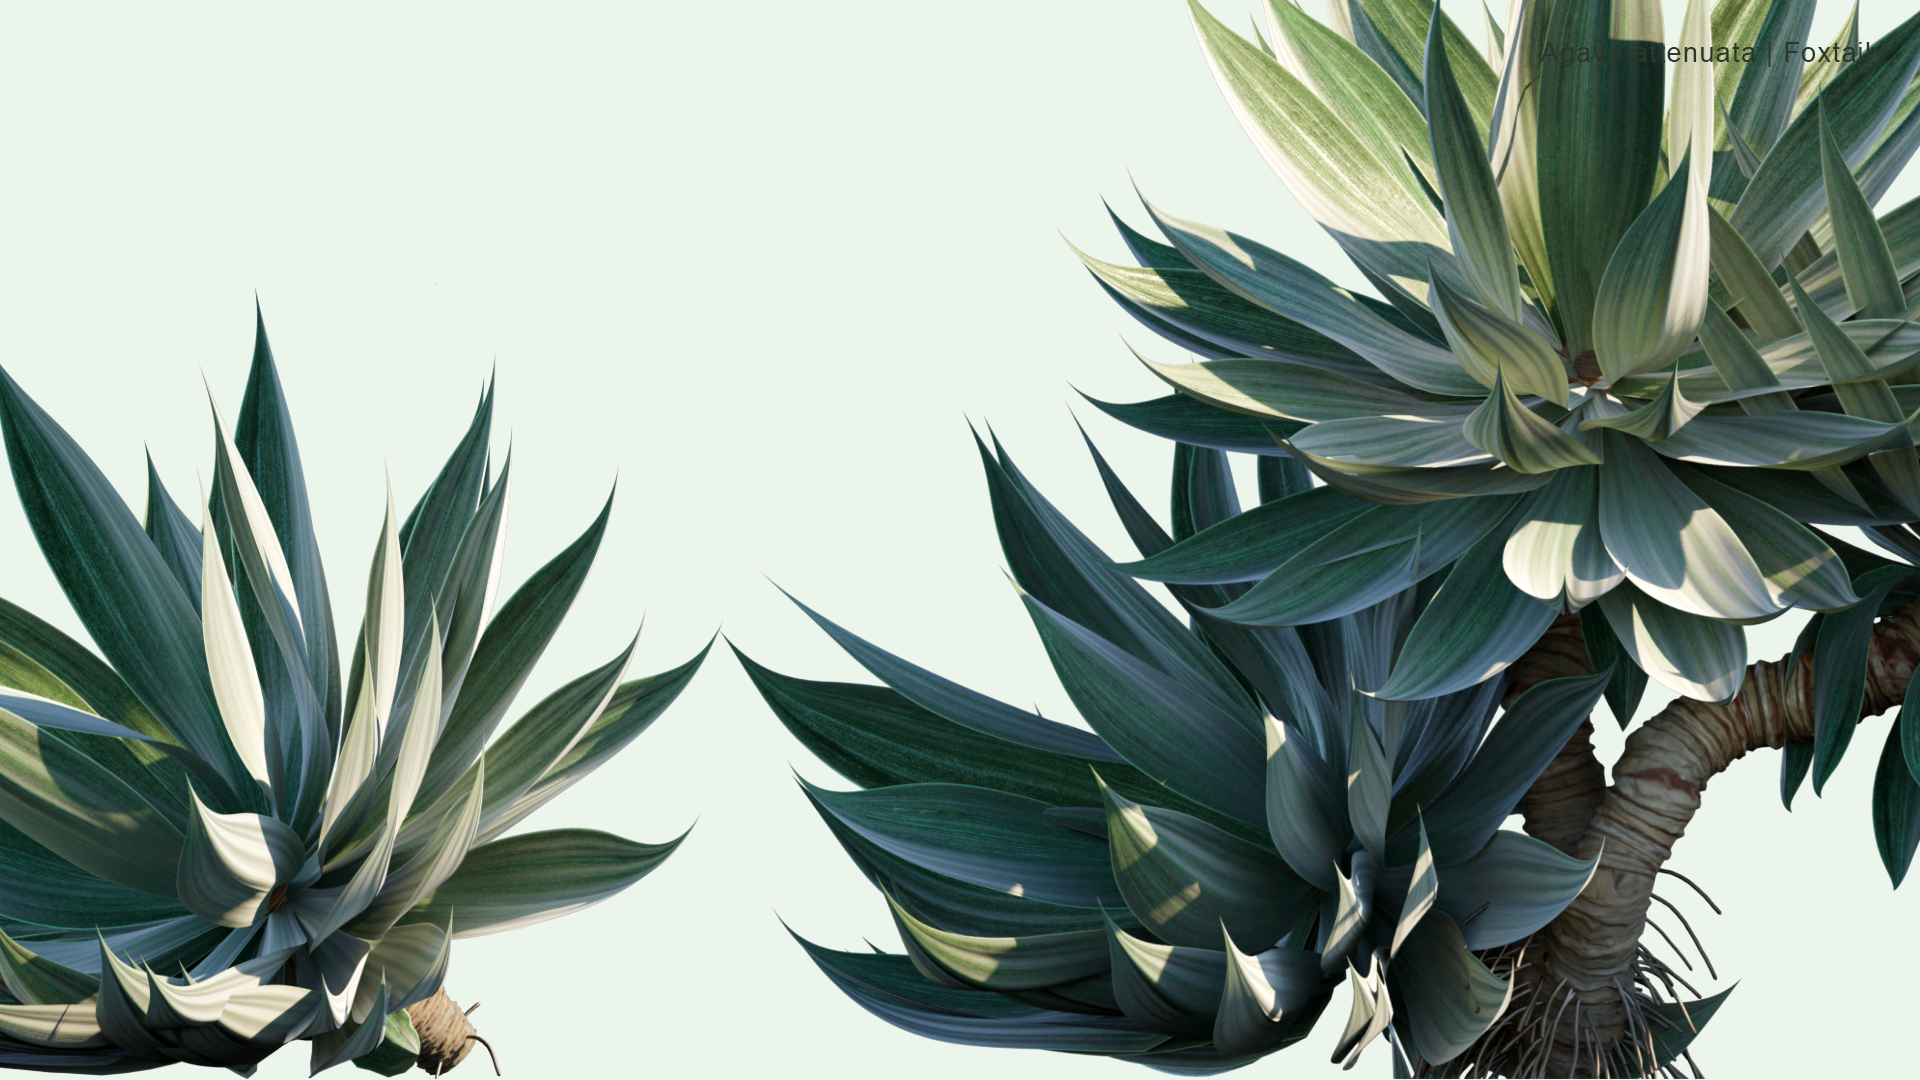 2D Agave Attenuata - Foxtail